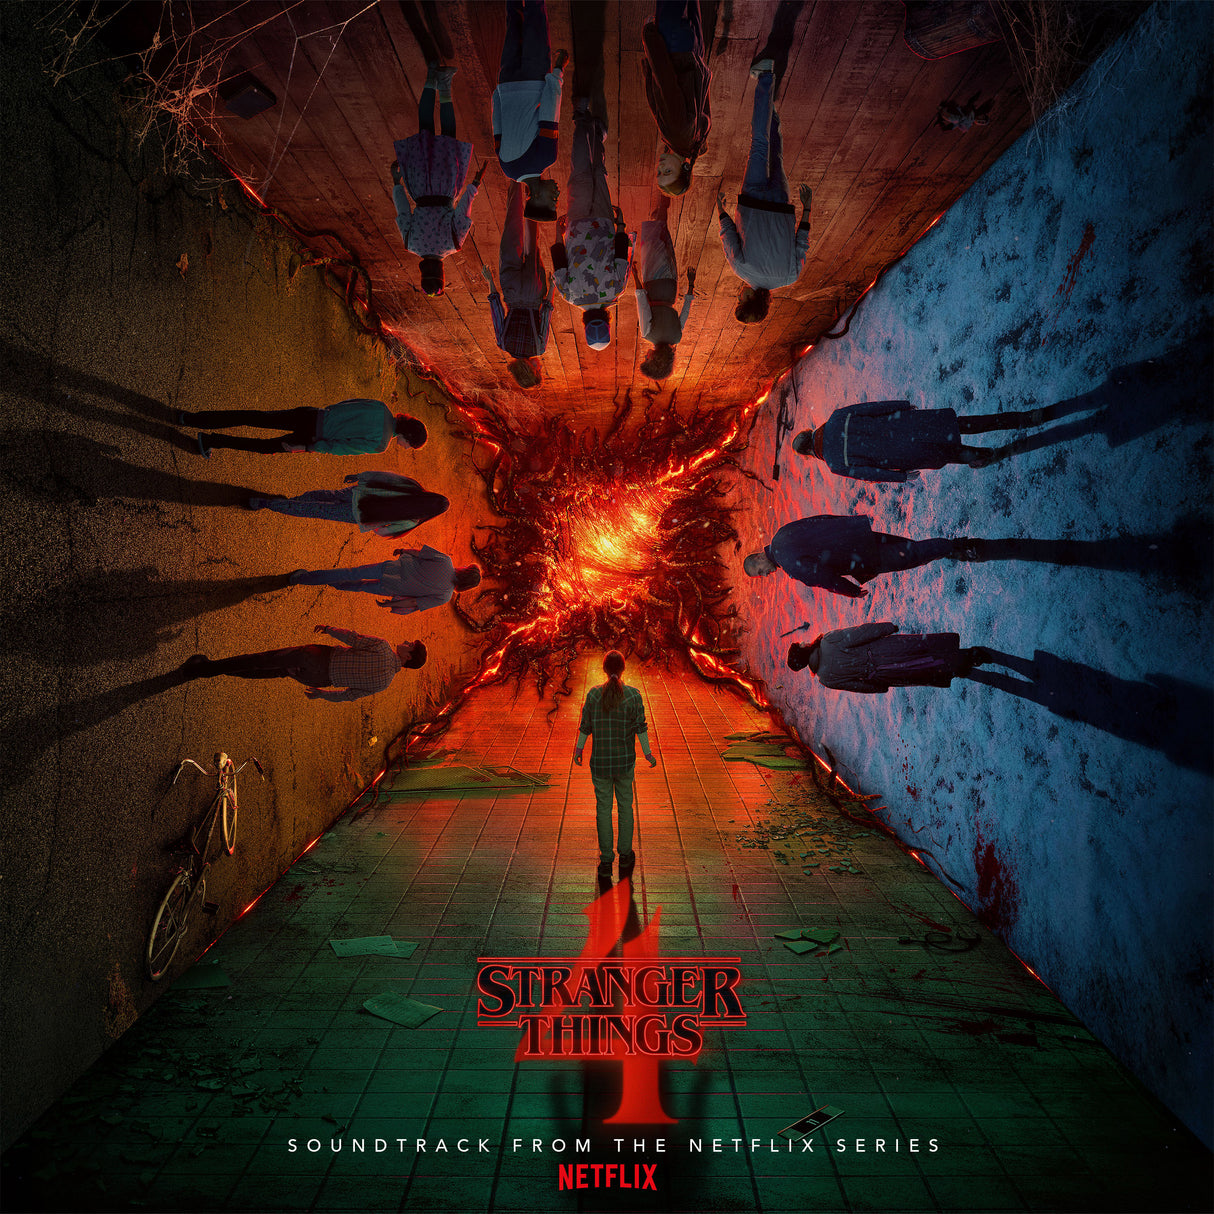 VARIOUS ARTISTS Stranger Things 4 (Soundtrack From The Netflix Series) [Vinyl]